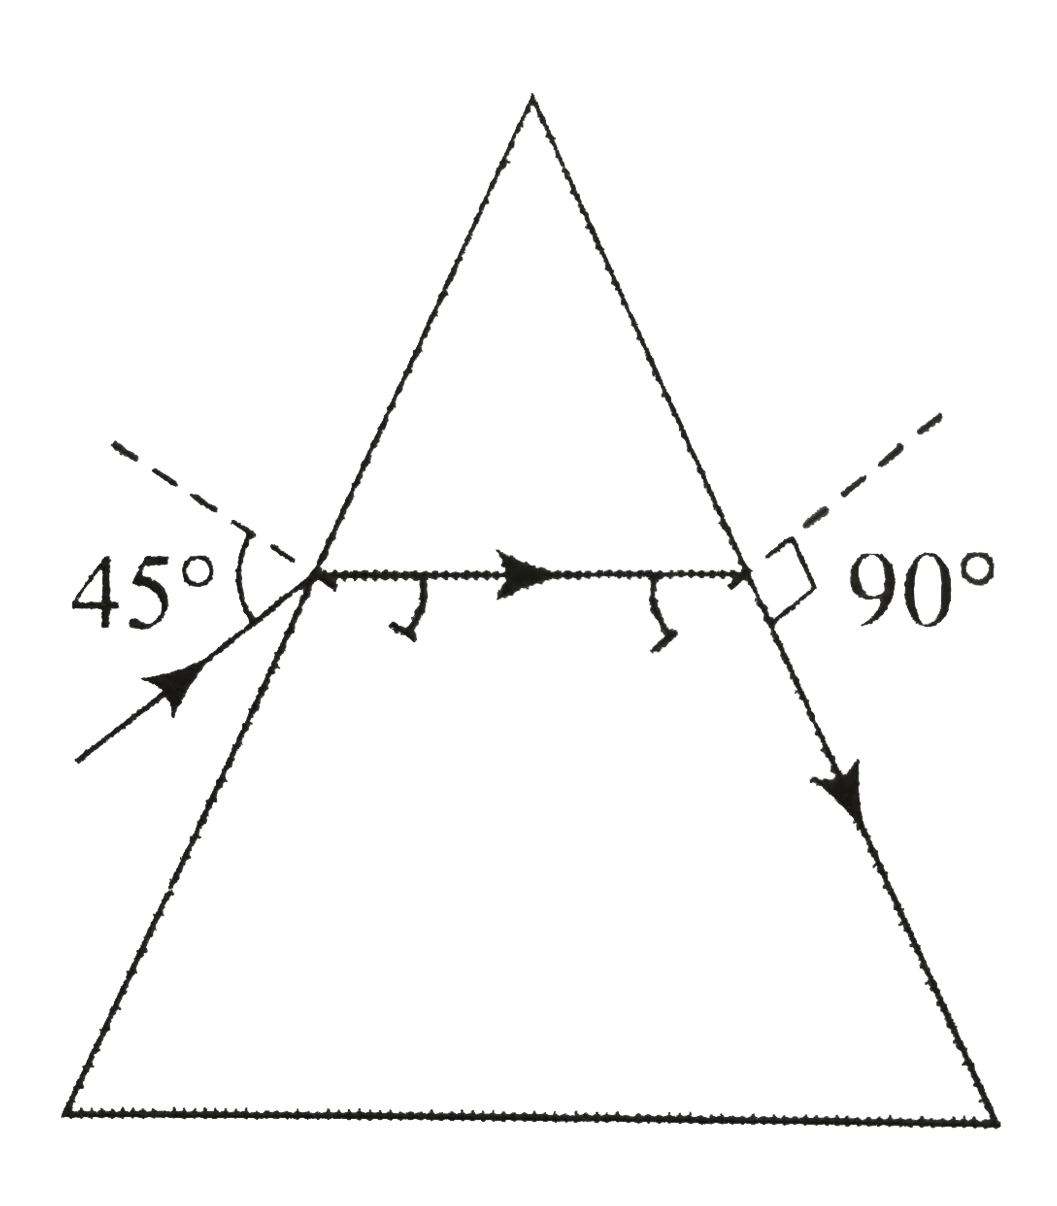 In an isosceles prism of angle 45^@, it is found that when the angle of incidence is same as the prism angle, the emergen ray grazes the emergent surface.   Find the refractive index of the material of the prism. For what angle of incidenc, the angle of deviation will be minimum?